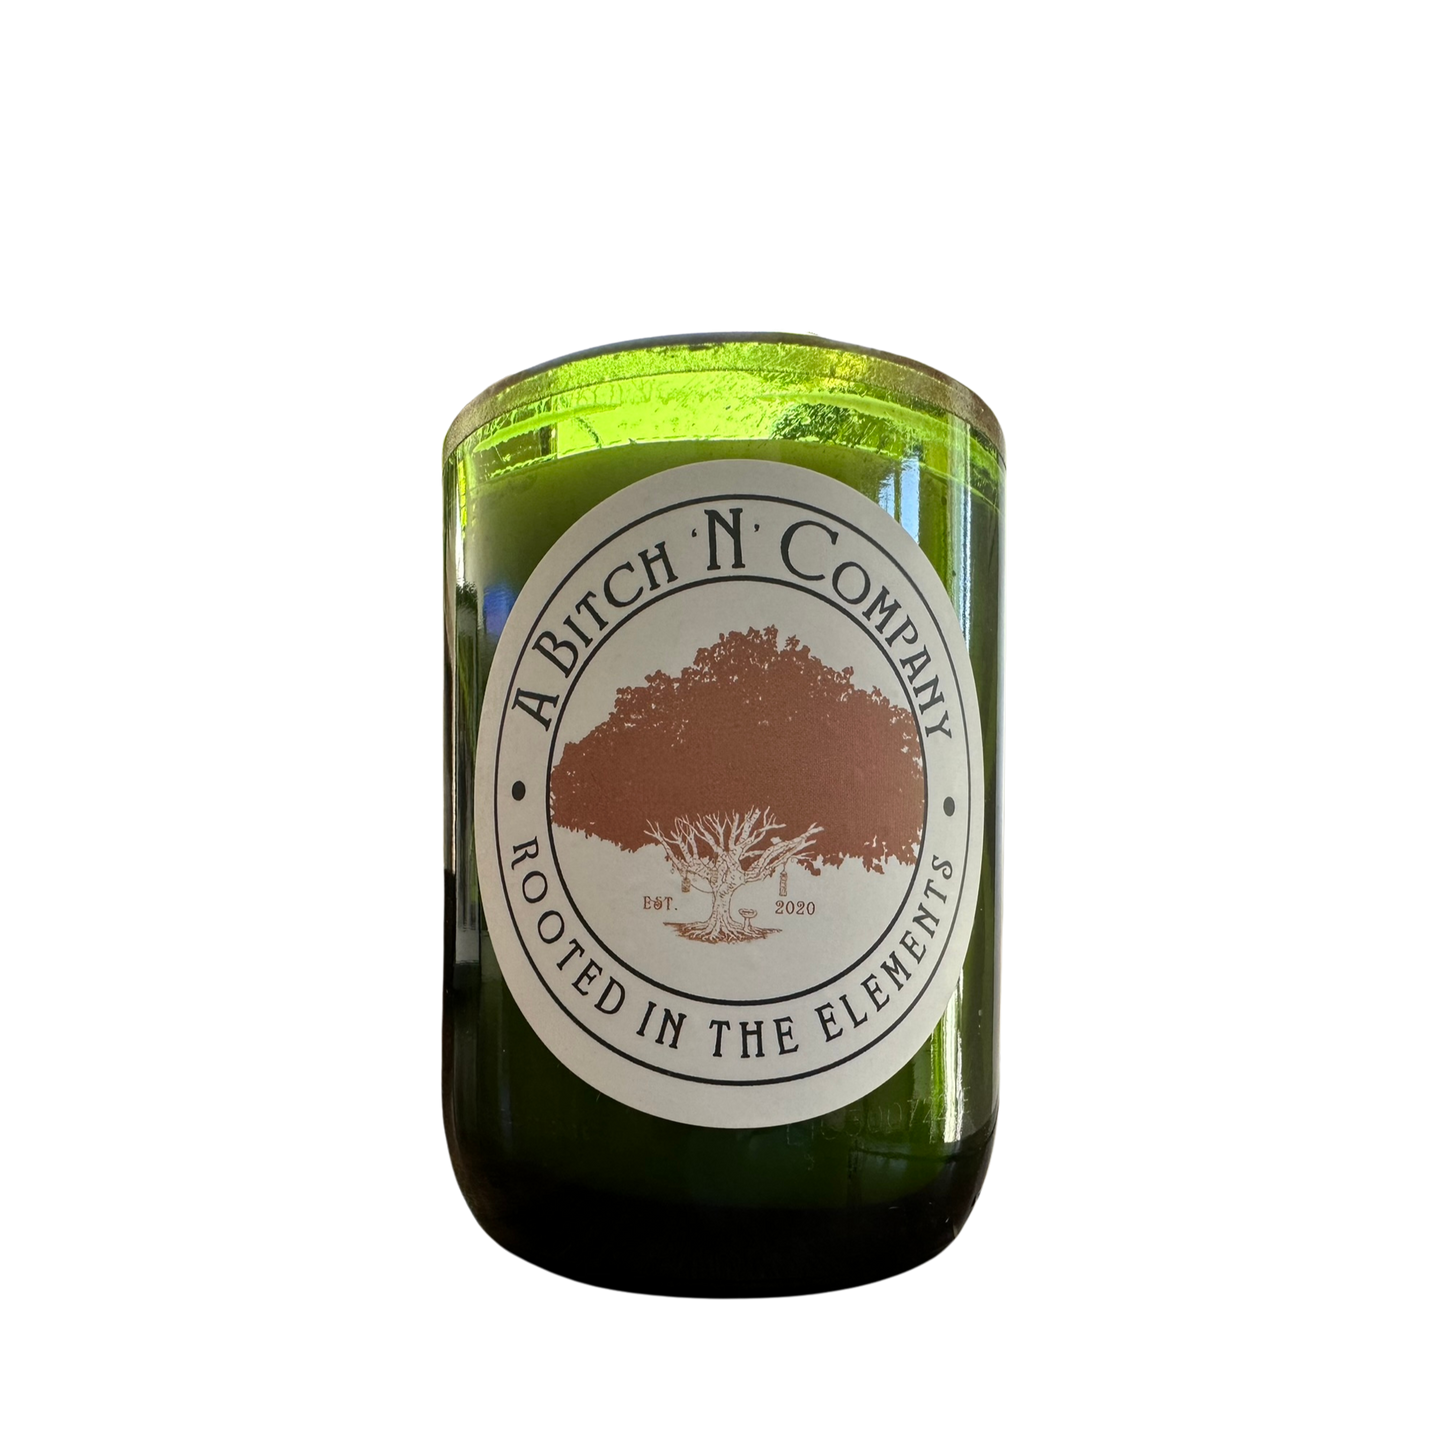 Illuminate Your Space with "A Bitch 'N' Company" - Dad's Clean Ride Candle